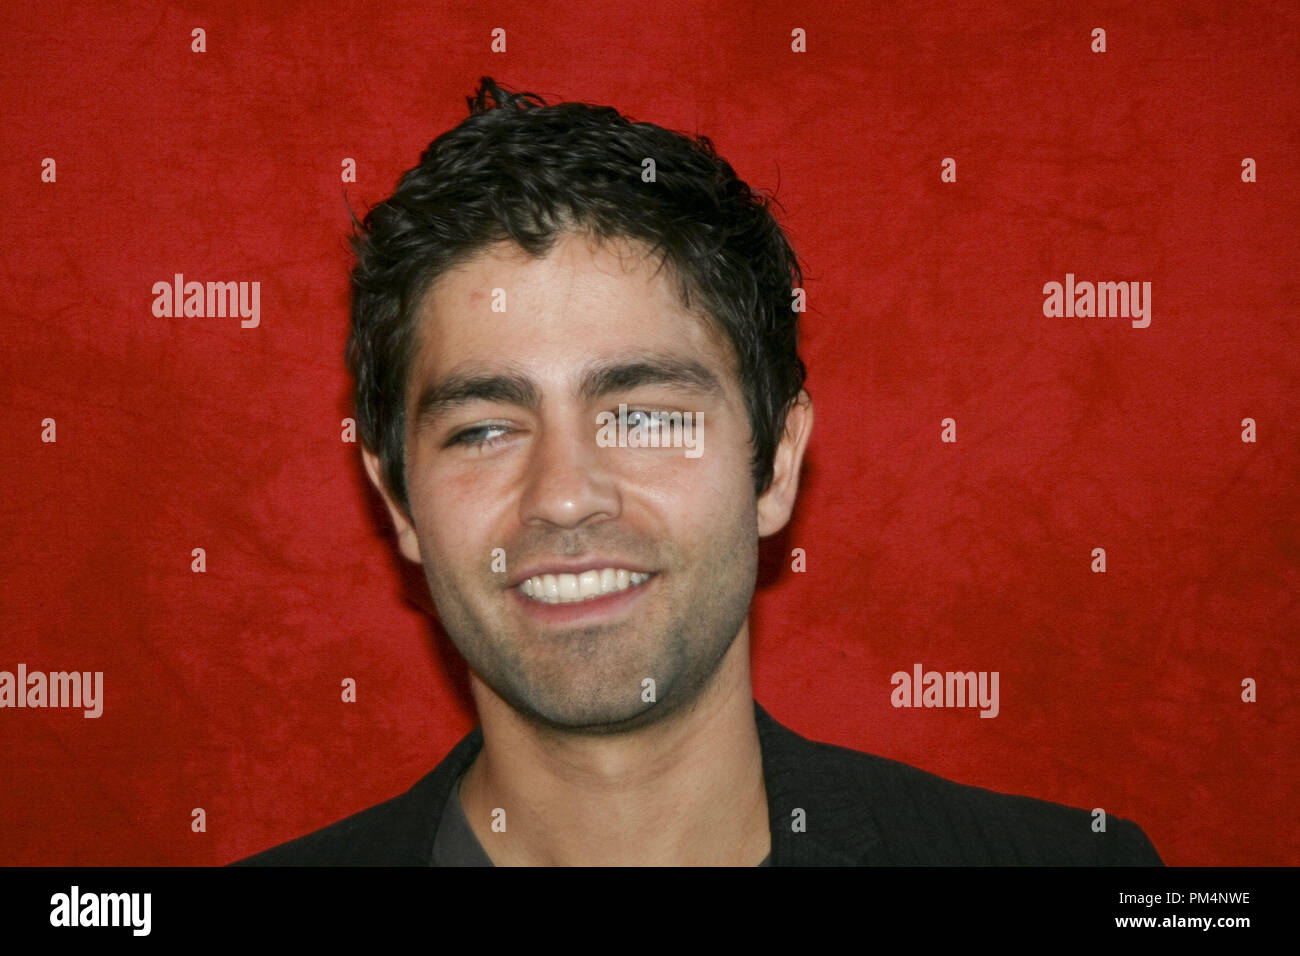 Adrian Grenier 'Teenage Paparazzo' Portrait Session, August 16, 2010.  Reproduction by American tabloids is absolutely forbidden. File Reference # 30445 016JRC  For Editorial Use Only -  All Rights Reserved Stock Photo